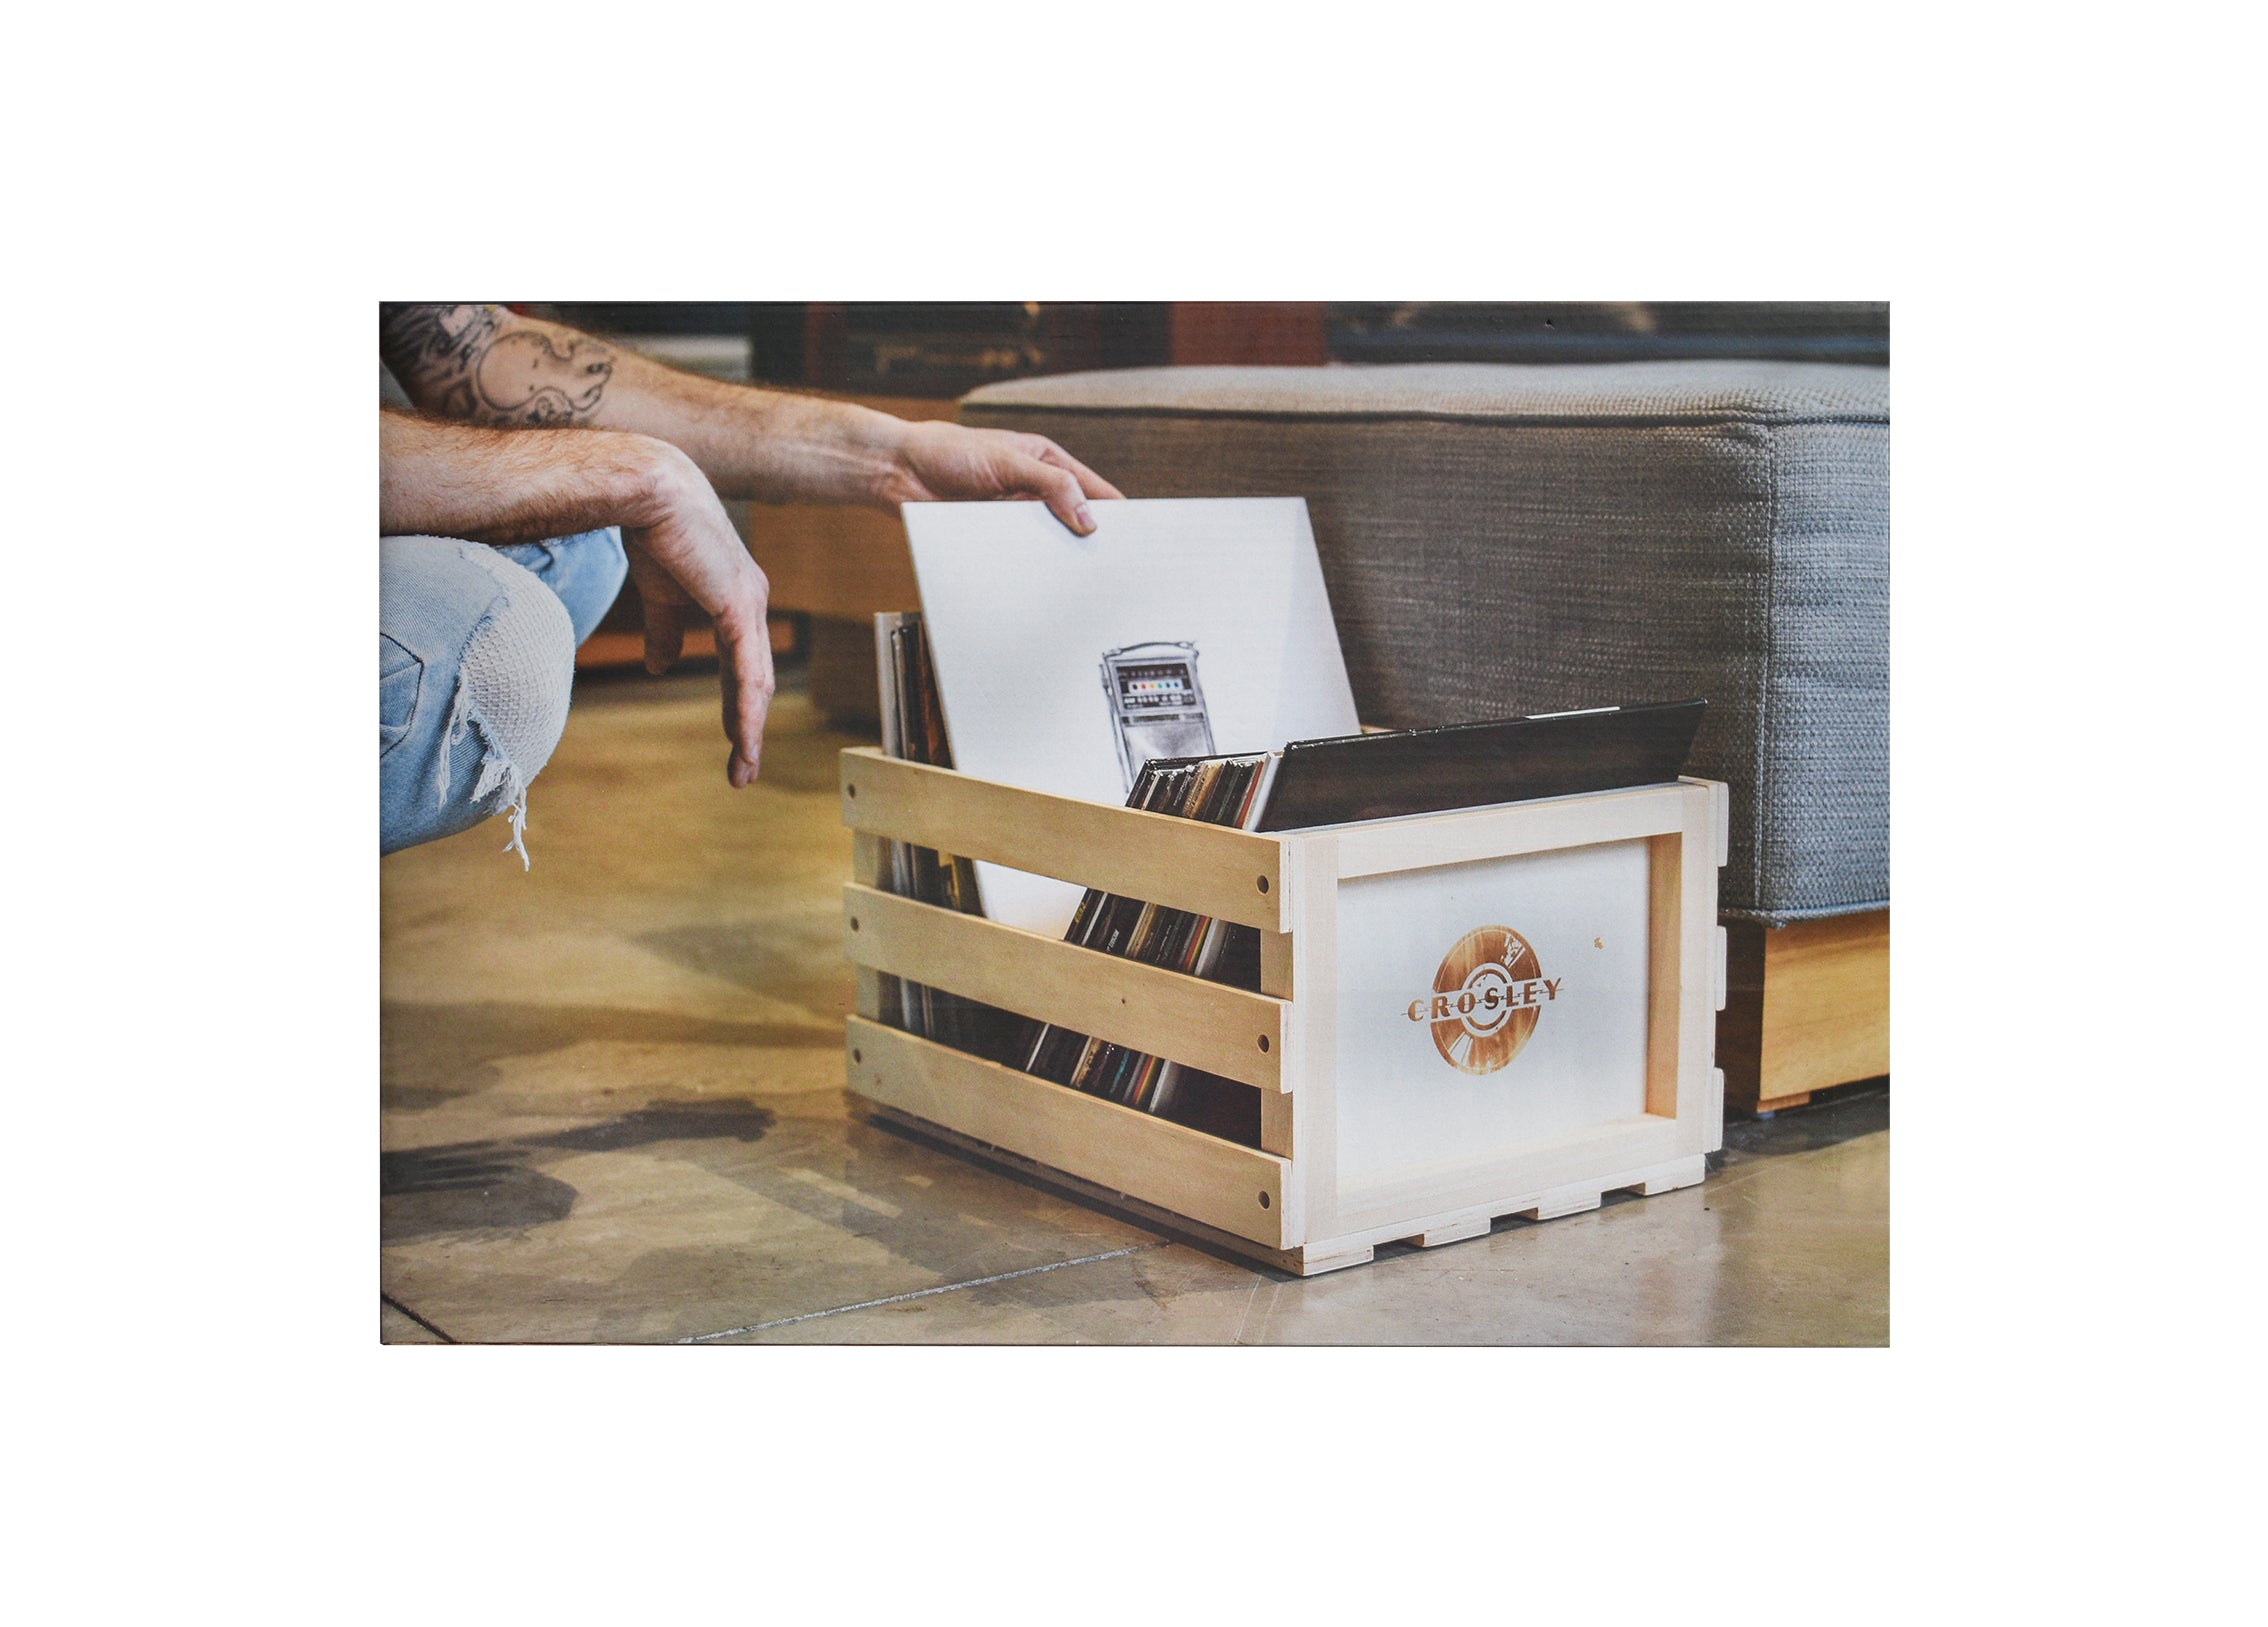 Wooden Record Storage Crate, Holds 75 Albums, Crosley